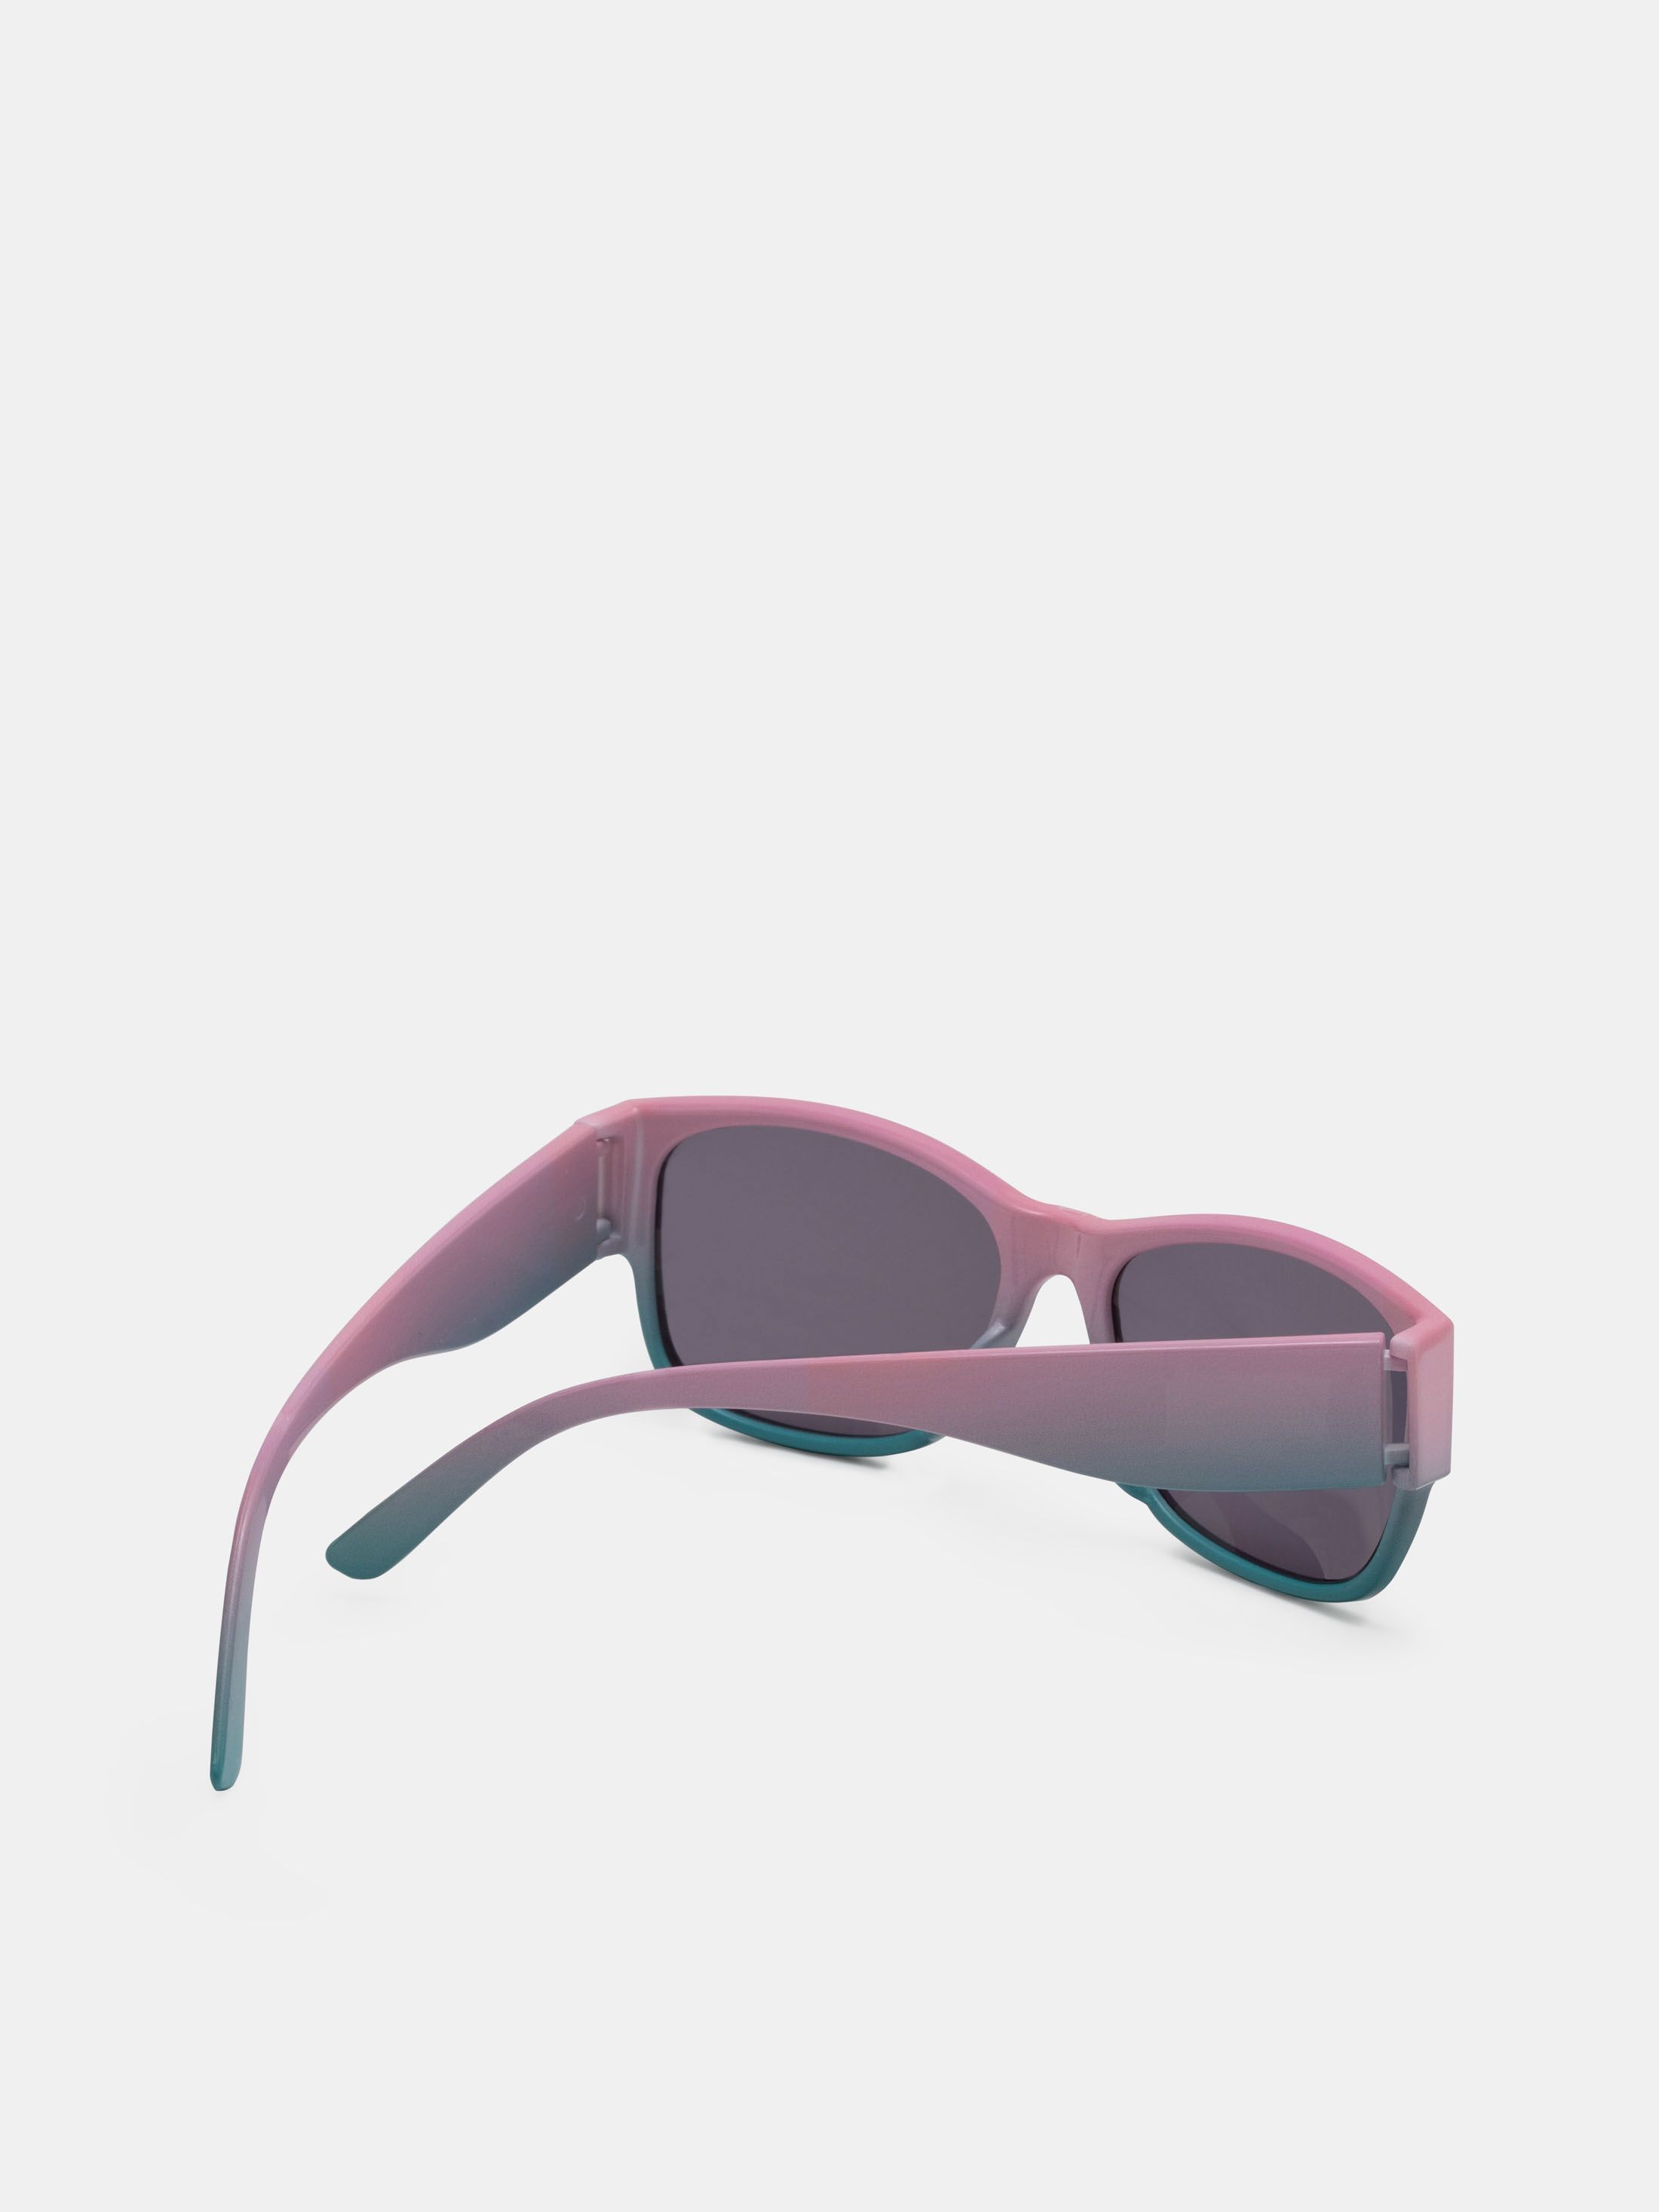 design your own sunglasses for summer